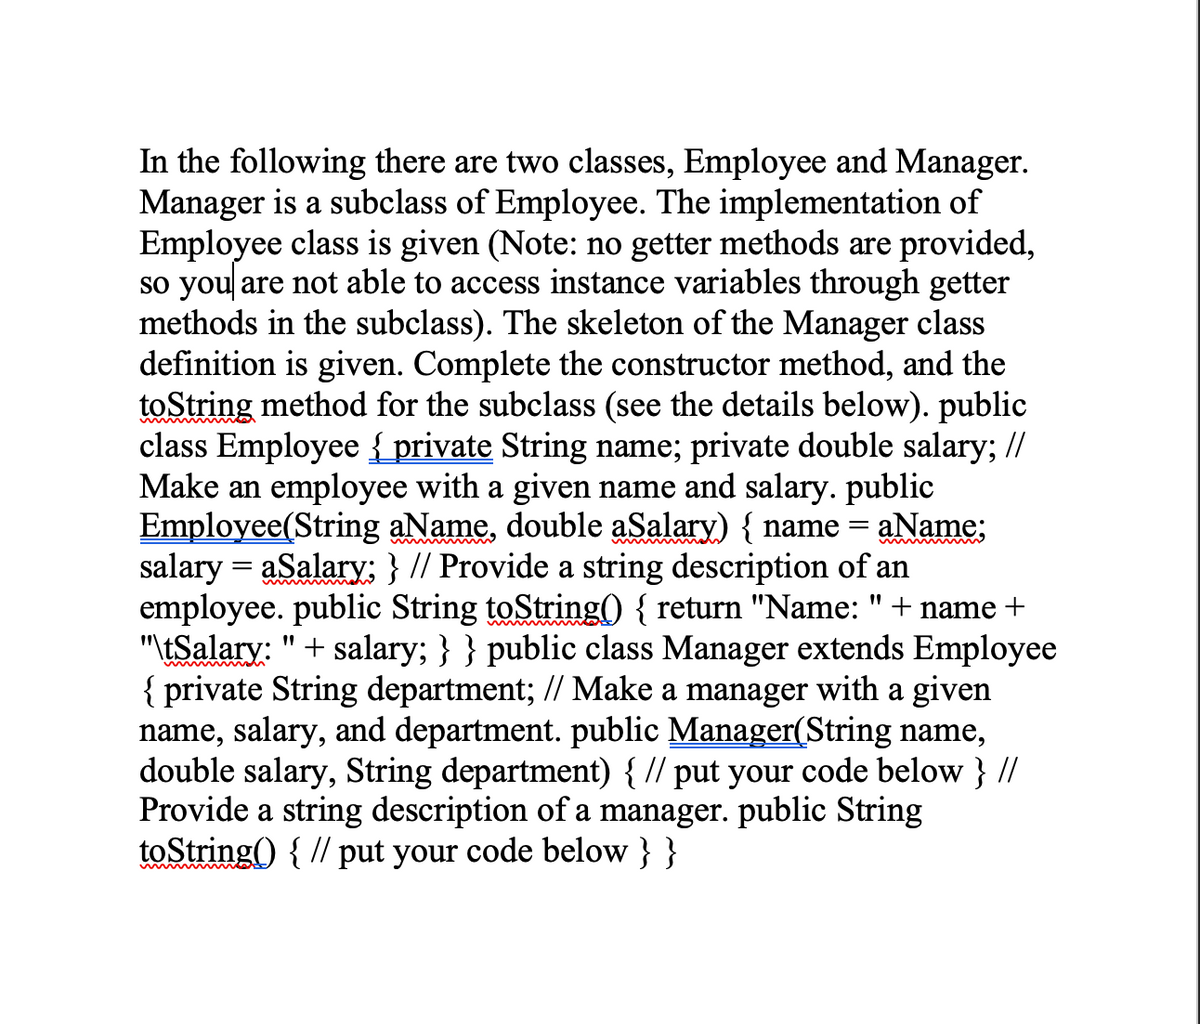 In the following there are two classes, Employee and Manager.
Manager is a subclass of Employee. The implementation of
Employee class is given (Note: no getter methods are provided,
so you are not able to access instance variables through getter
methods in the subclass). The skeleton of the Manager class
definition is given. Complete the constructor method, and the
toString method for the subclass (see the details below). public
class Employee {_private String name; private double salary; //
Make an employee with a given name and salary. public
Employee(String aName, double aSalary) { name
salary = aSalary; } // Provide a string description of an
employee. public String toString() { return "Name:
"tSalary: "+ salary; } } public class Manager extends Employee
{ private String department; // Make a manager with a given
name, salary, and department. public Manager(String name,
double salary, String department) { // put your code below } //
Provide a string
toString() { // put your code below } }
aName;
+ name +
ription of a manager. public String
